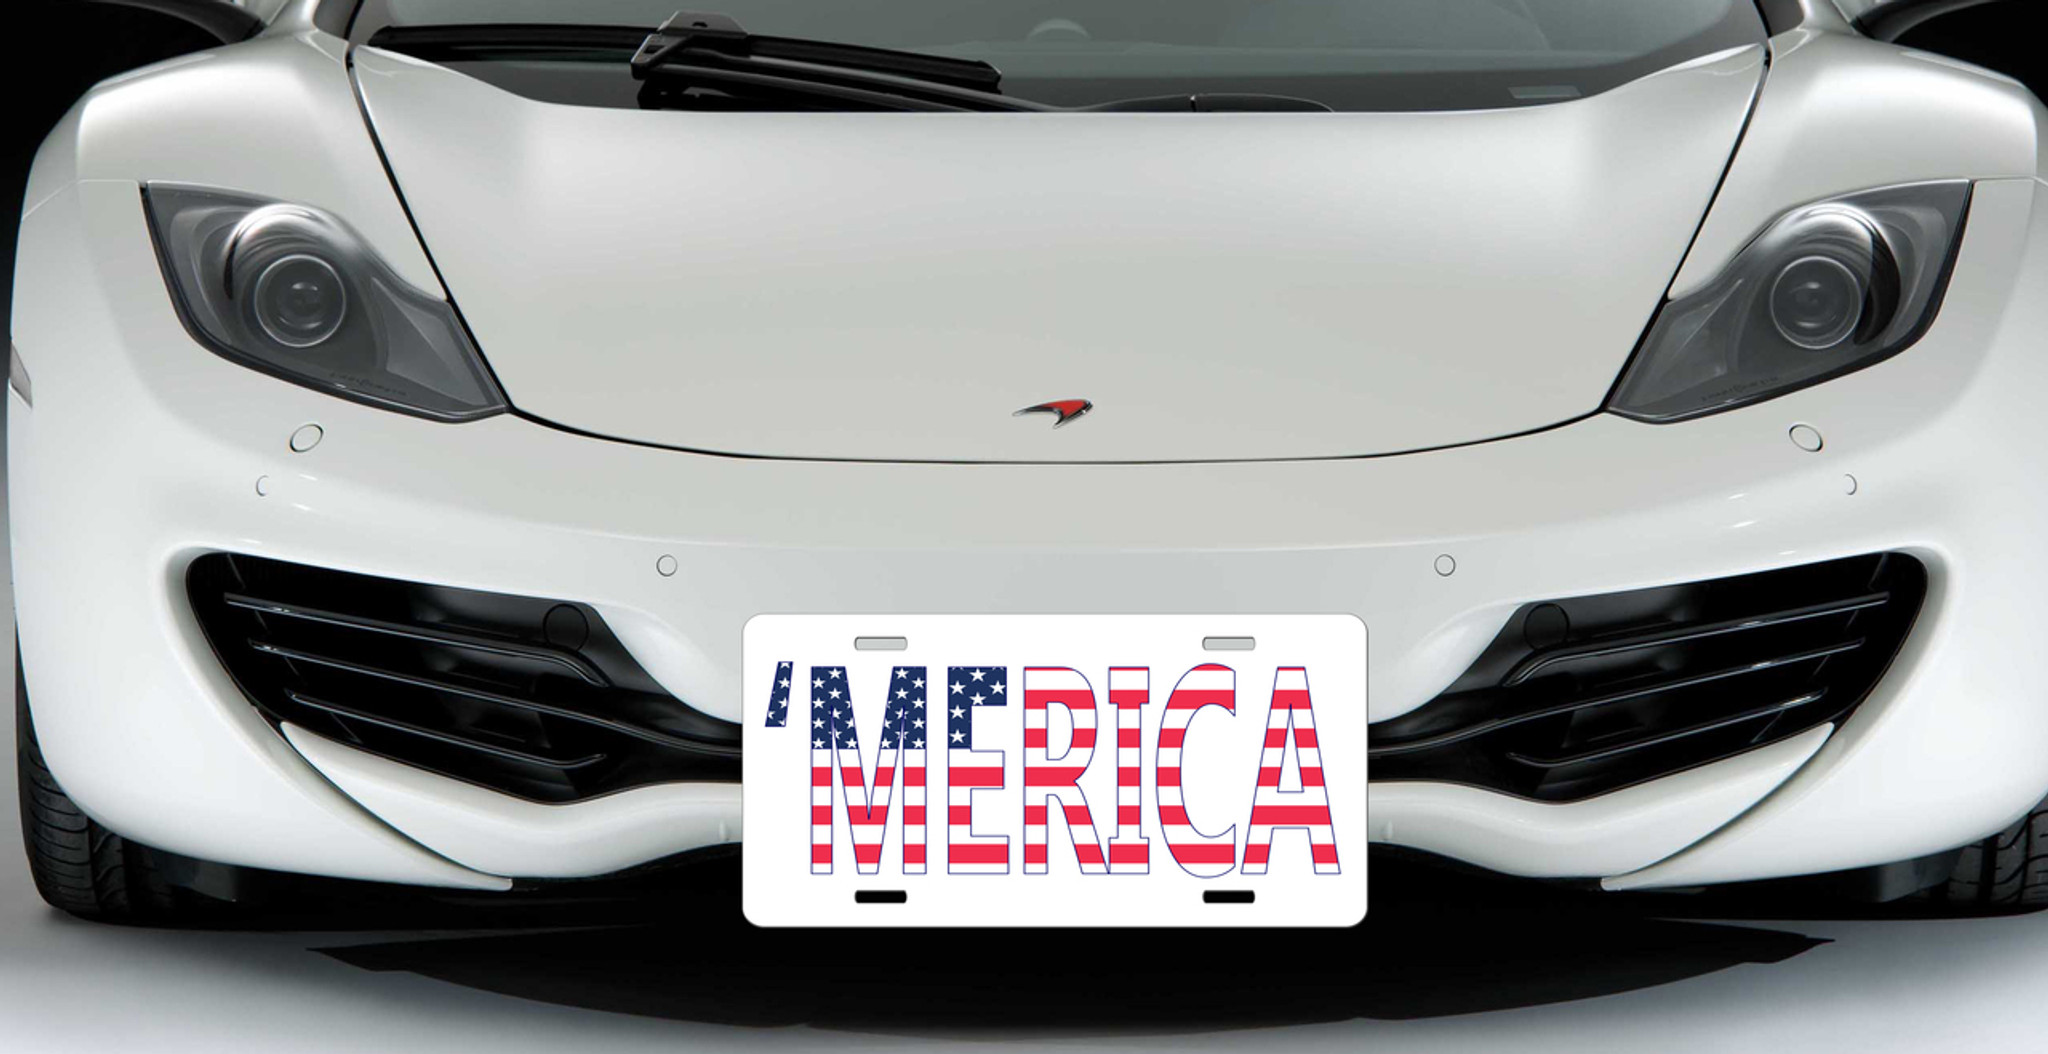 personalized-car-tag-merica-license-plate-simplycustomized